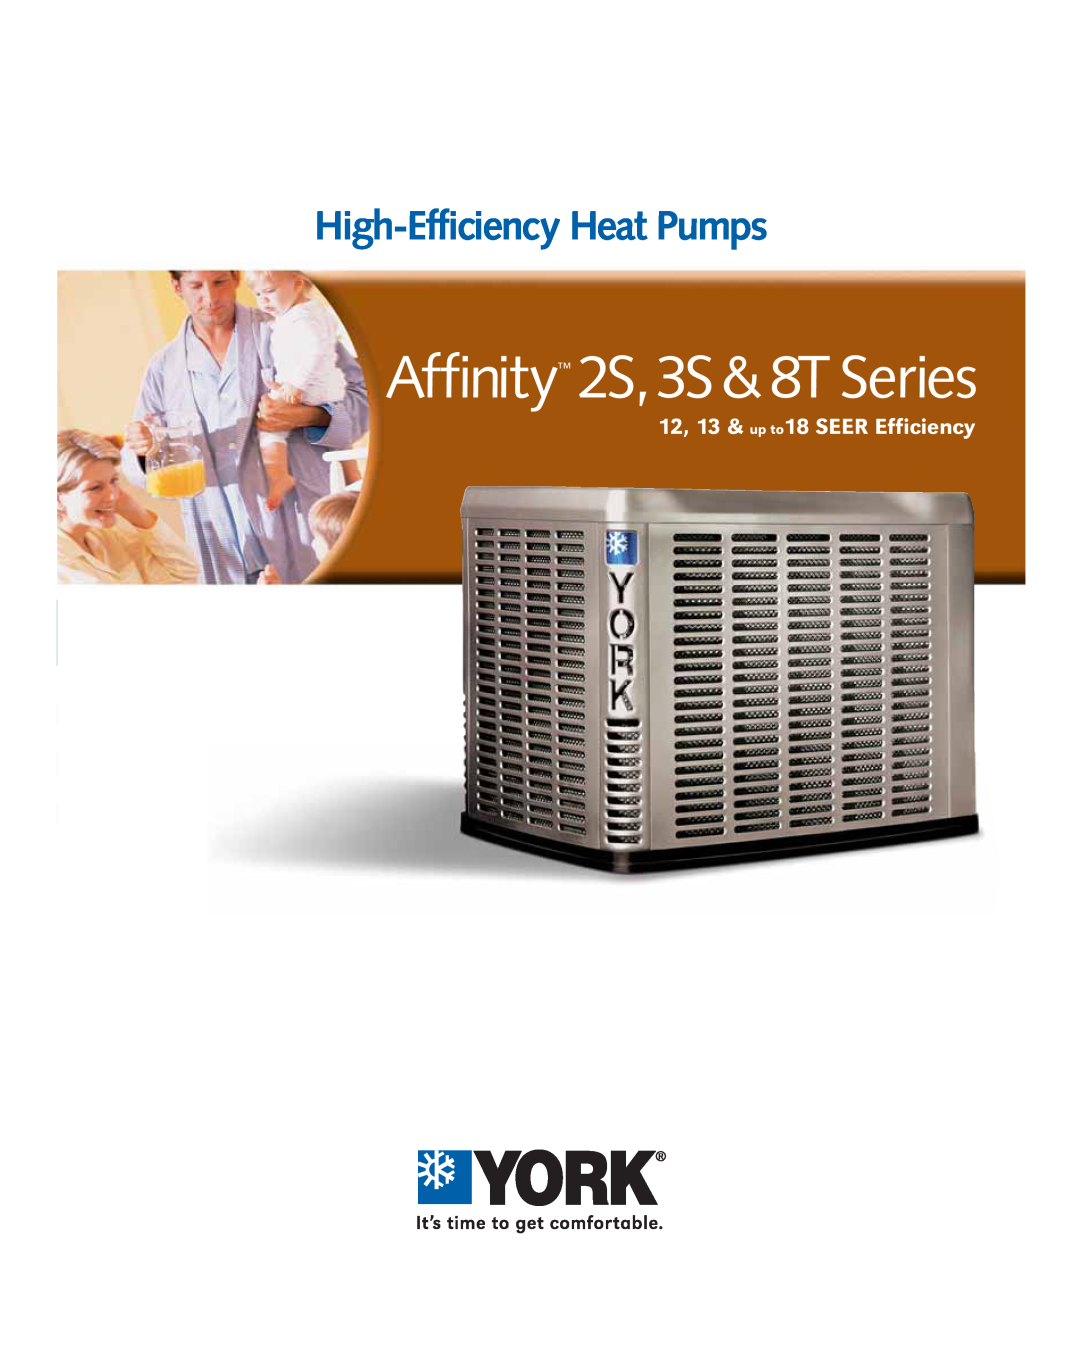 York manual Affinity 2S,3S& 8T Series, High-EfficiencyHeat Pumps, 12, 13 & up to18 SEER Efficiency 